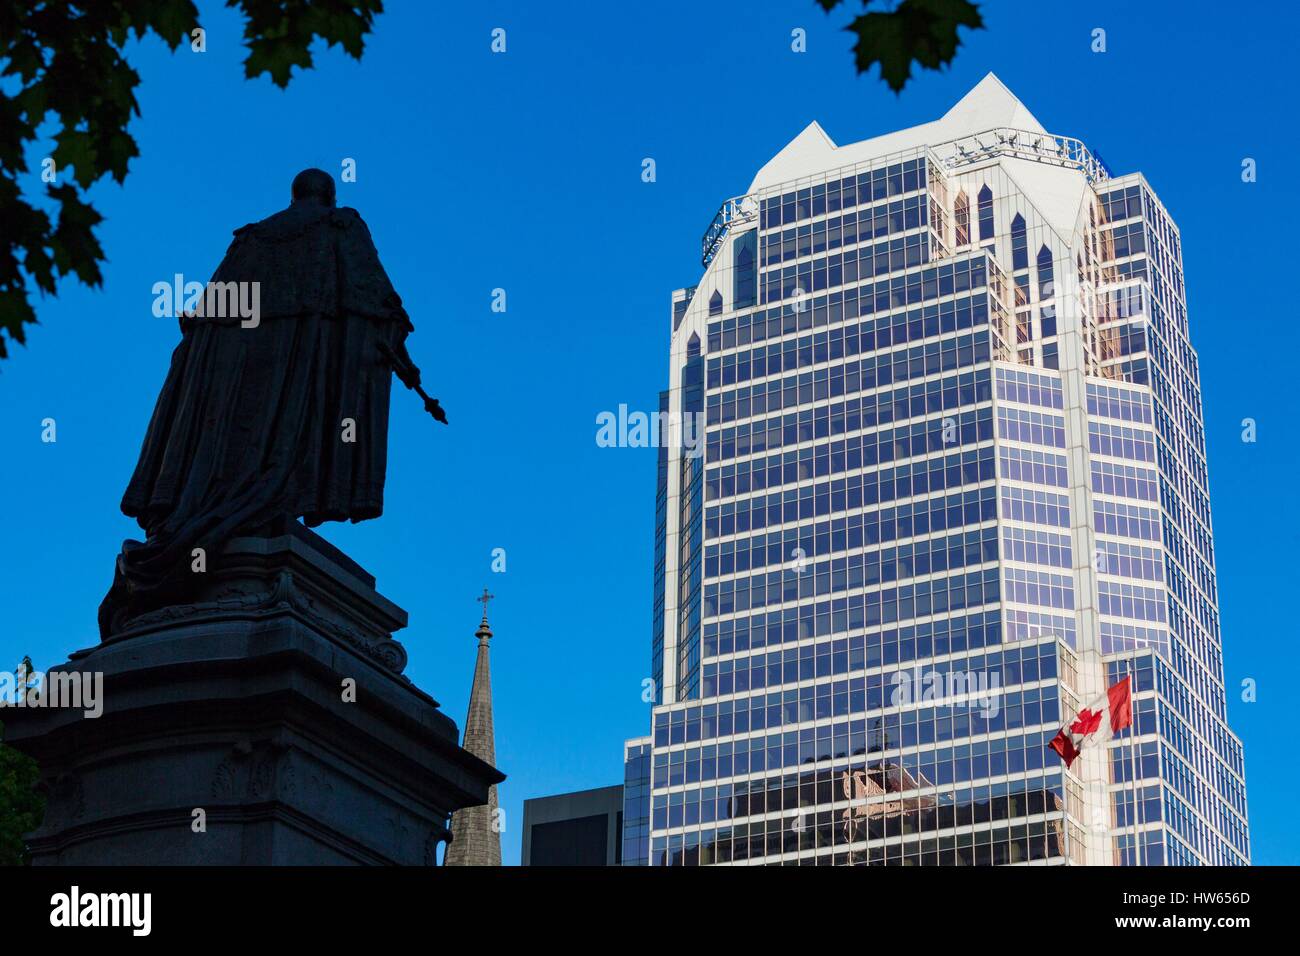 Canada, Quebec province, Montreal, downtown on Phillips Square, the statue of King Edward VII of the sculptor Louis Philippe Hebert and skyscrapers tower KPMG Stock Photo